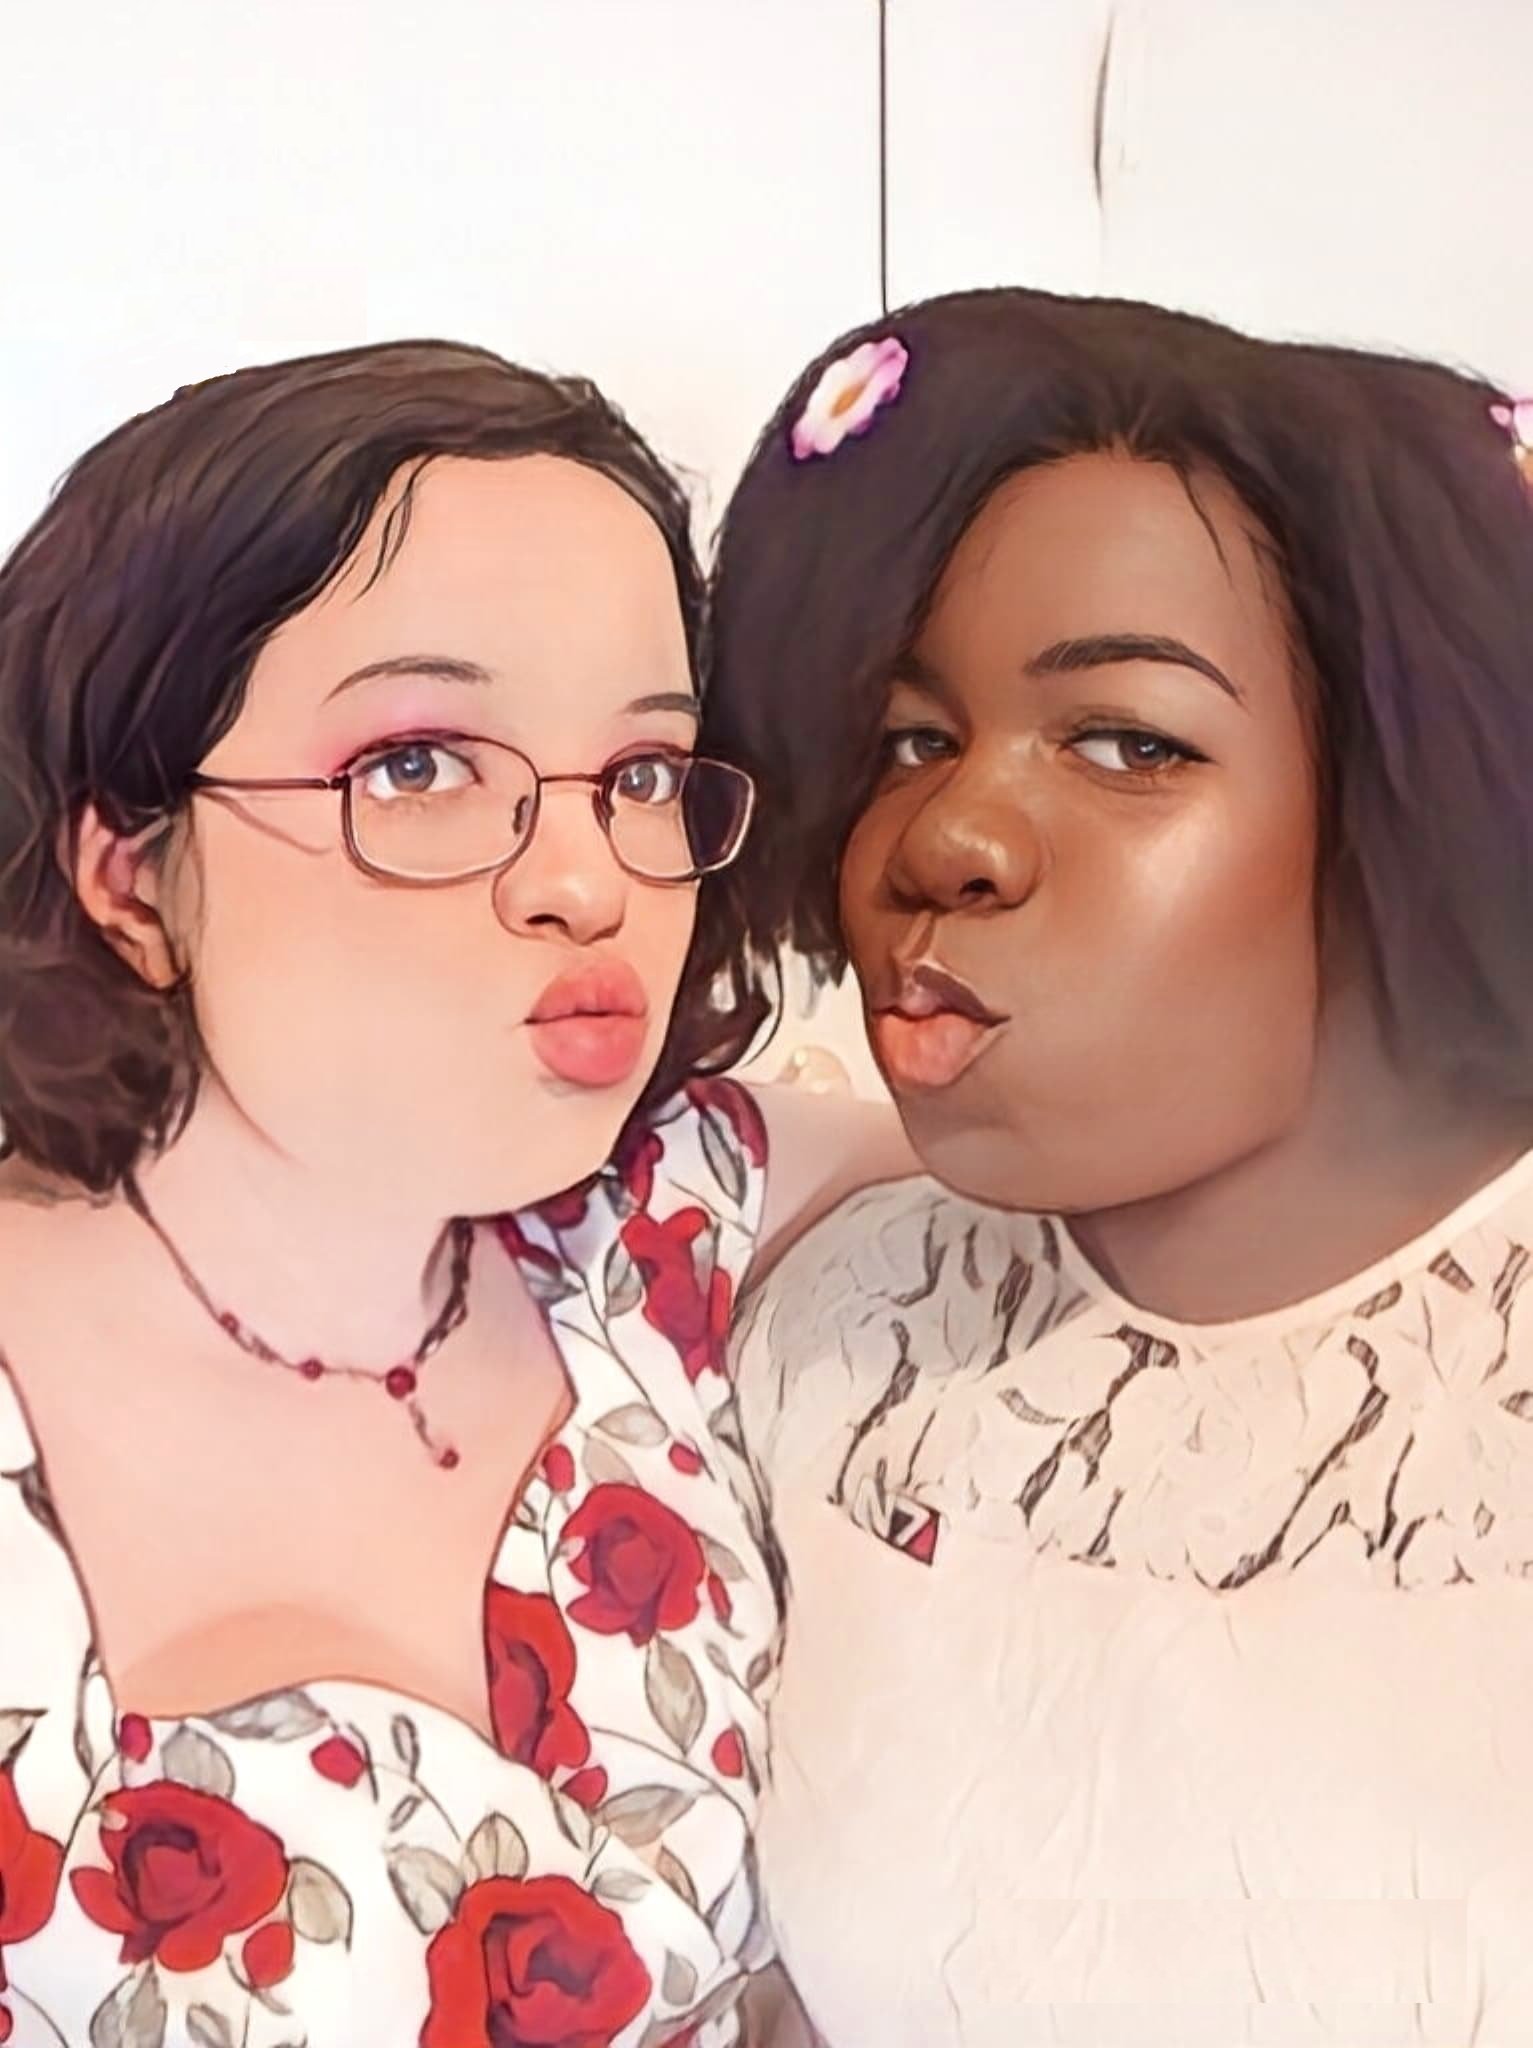  a cartoon-style image of 2 women making puckered lipped kissy faces at the camera. The one on the left has light skin, brown eyes, and hair, and is wearing glasses, a necklace with red jewels on it, and a white dress with red flowers and green leave